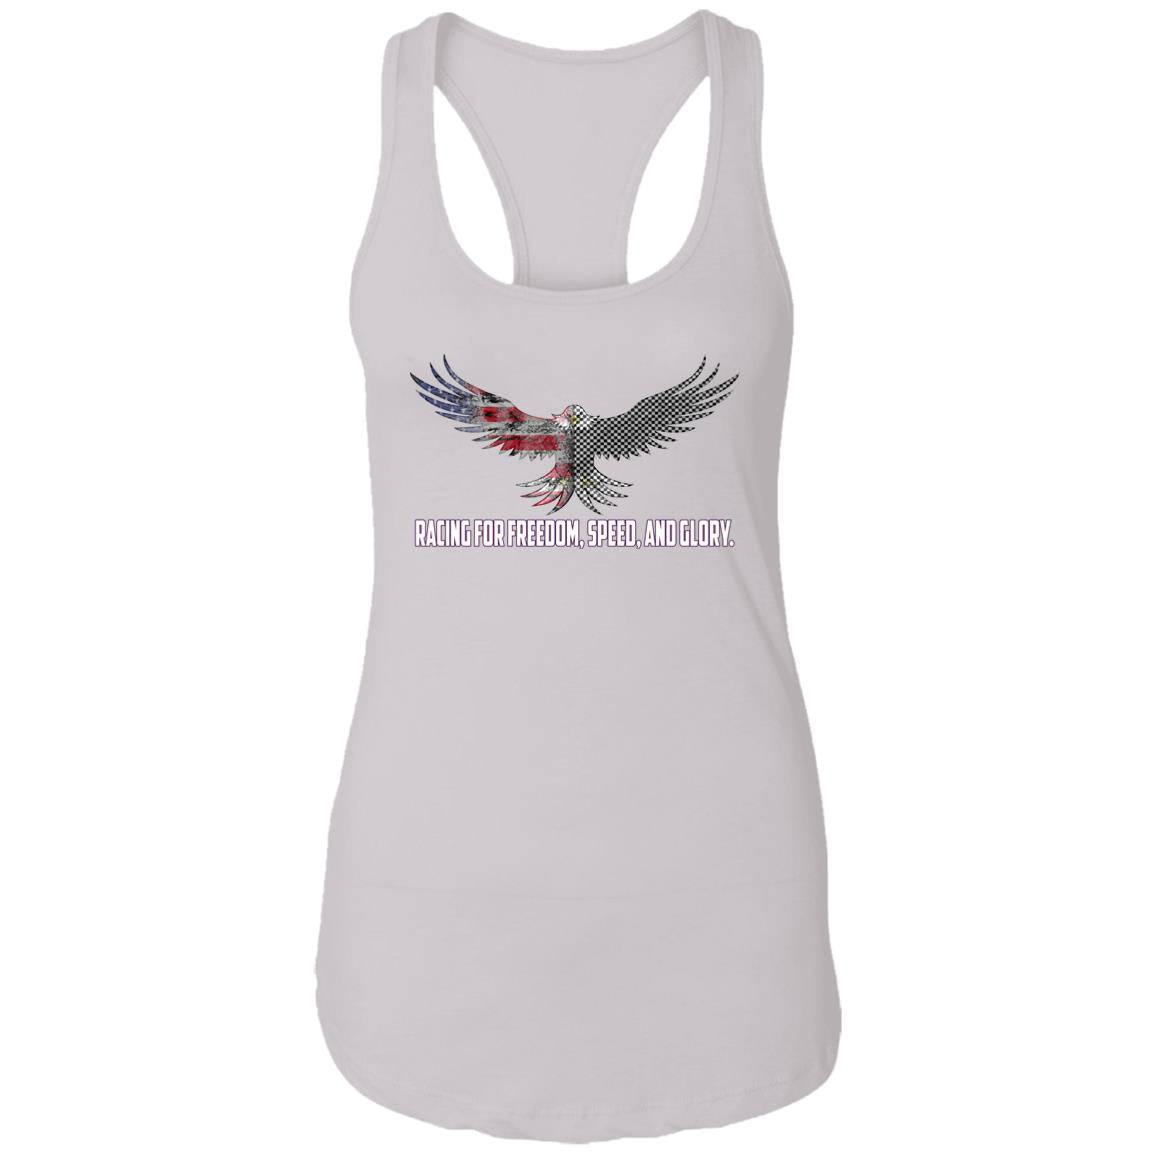 Racing For Freedom, Speed, And Glory Ladies Ideal Racerback Tank